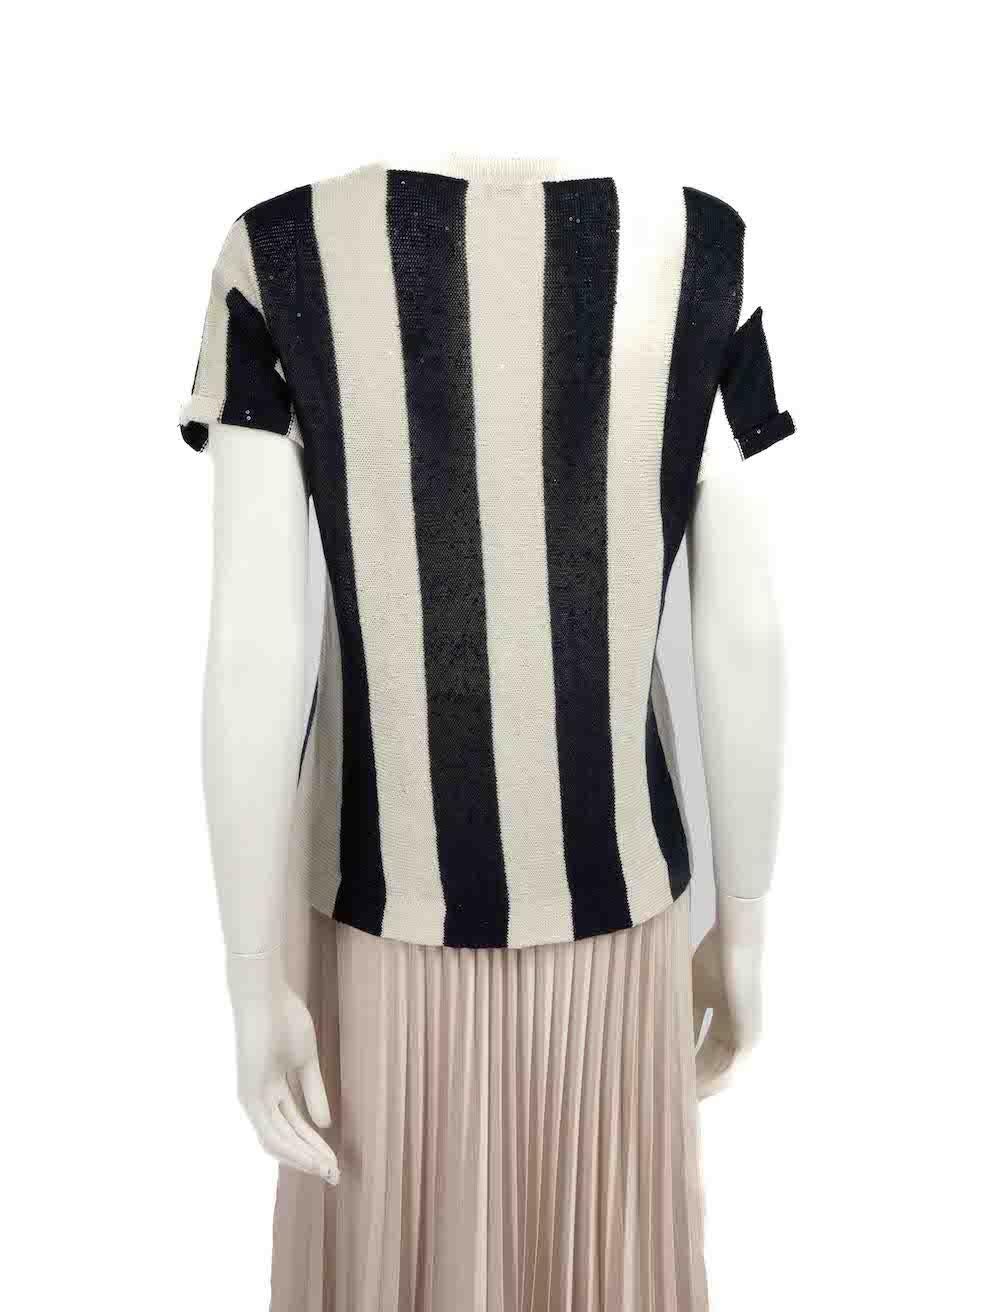 Brunello Cucinelli Striped Sequinned Knit Top Size XS In Good Condition For Sale In London, GB